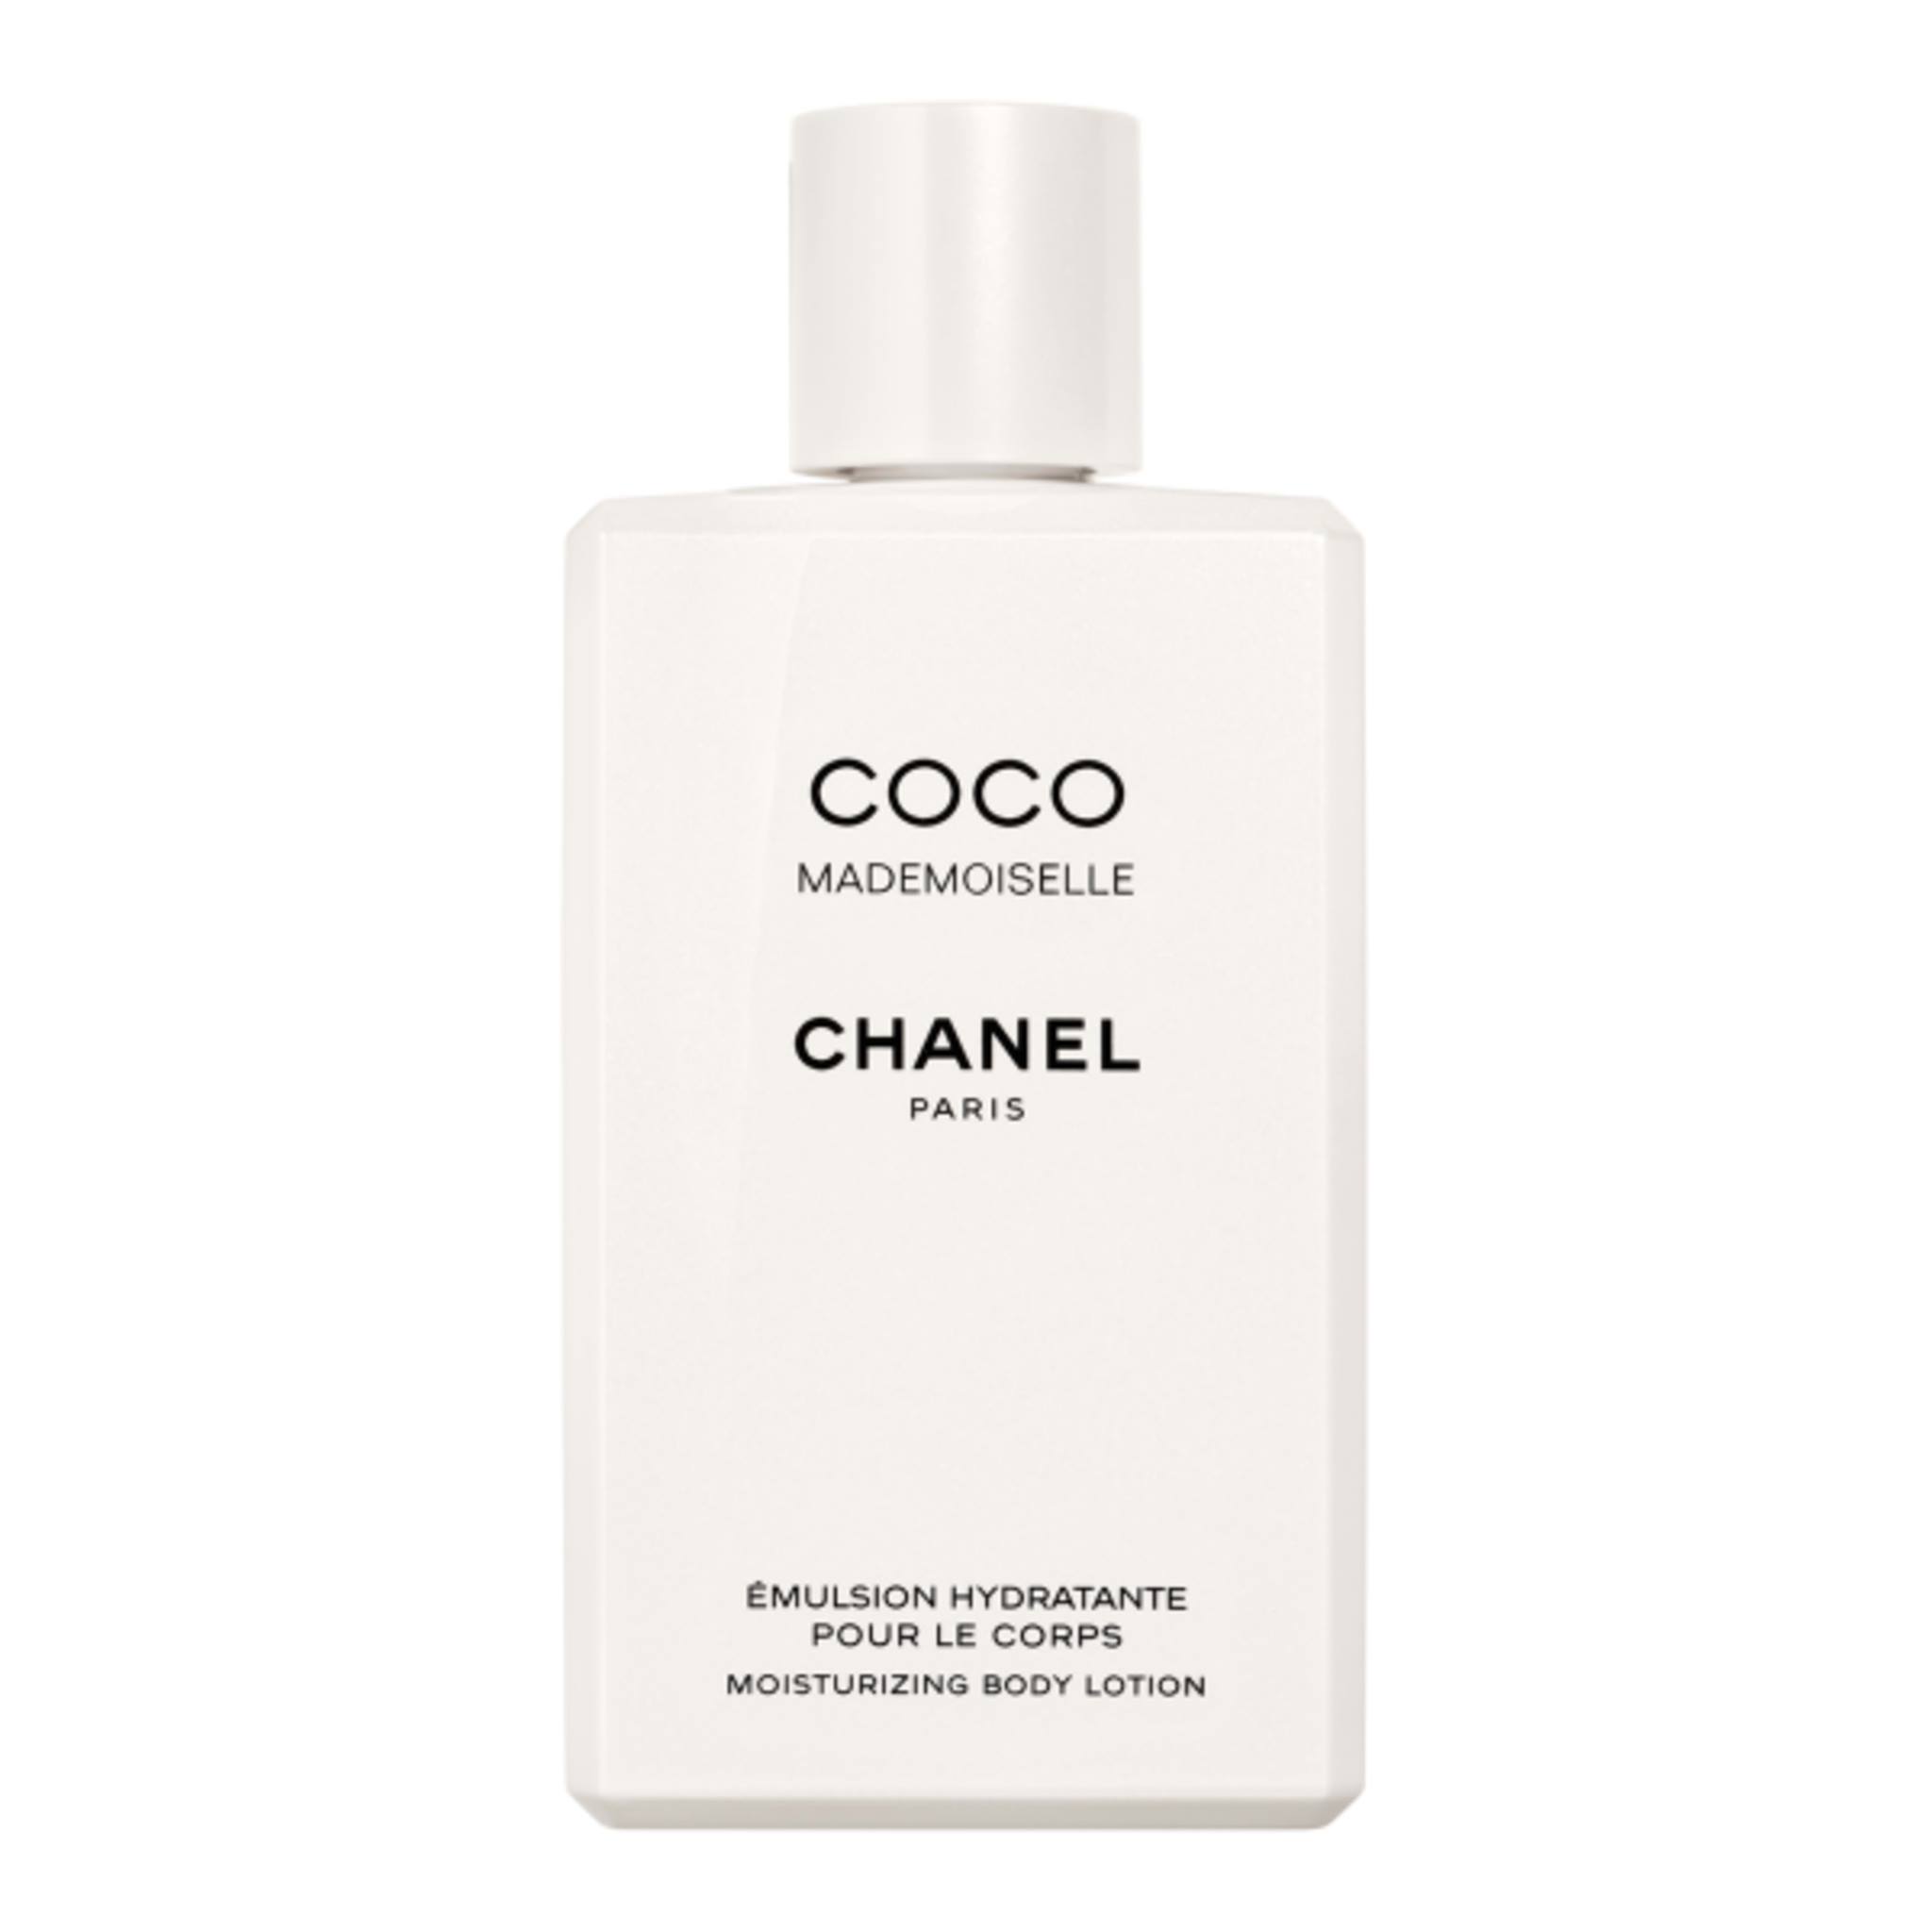 Dưỡng thể Chanel Coco Mademoiselle Body Cream